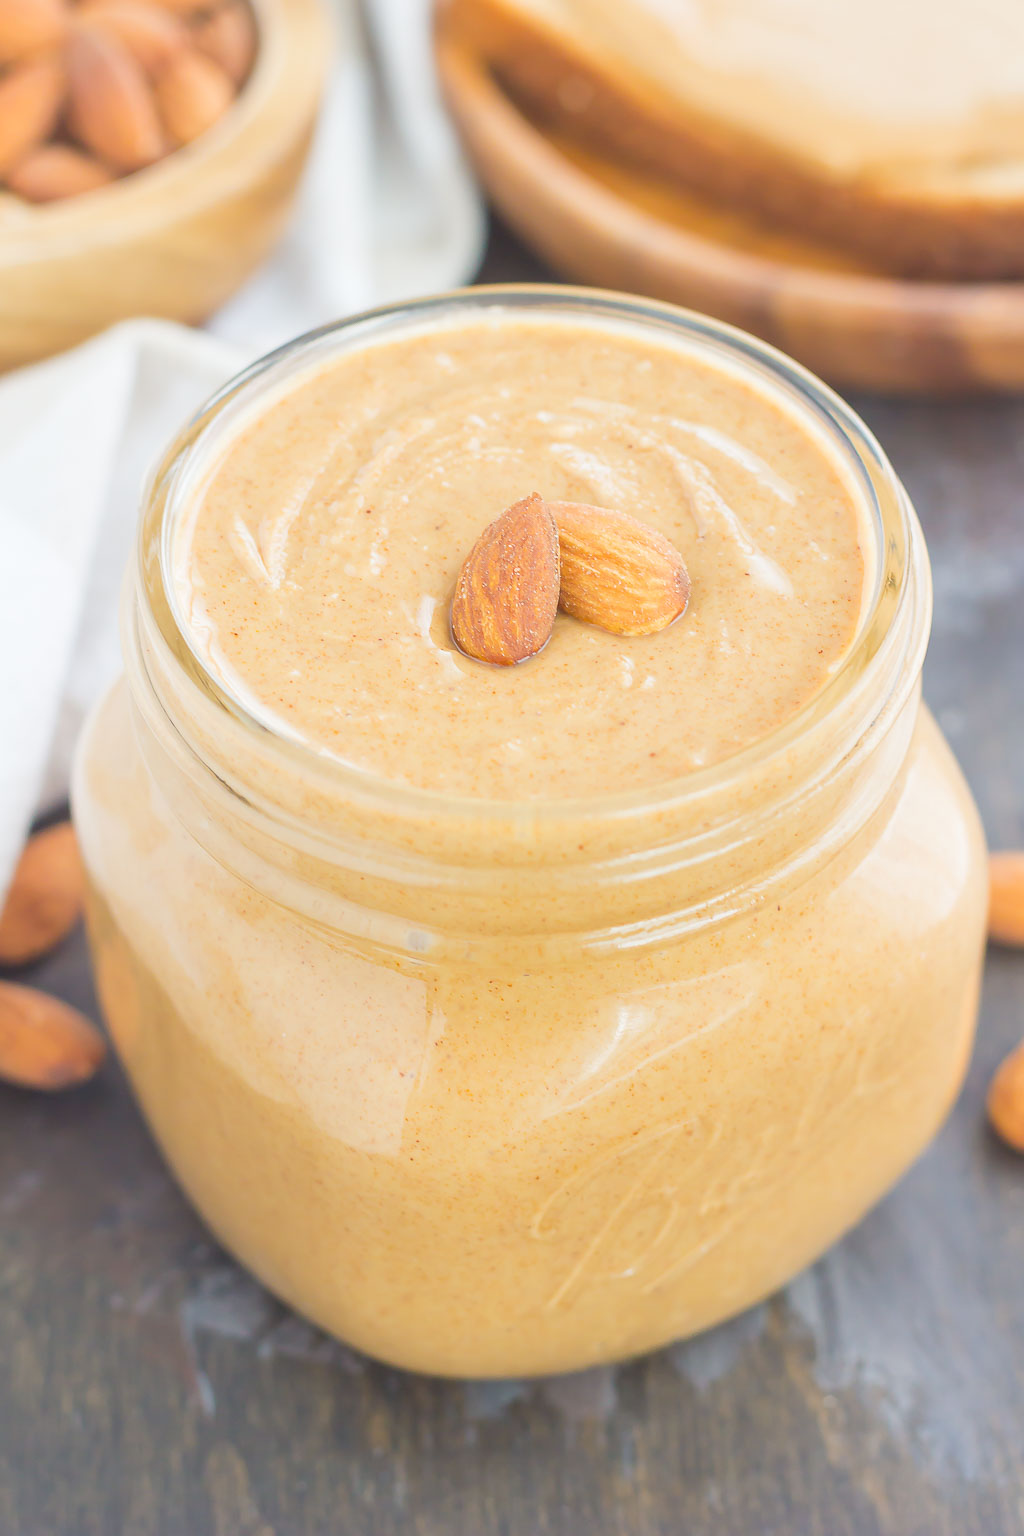 jar of homemade almond butter garnished with two almonds